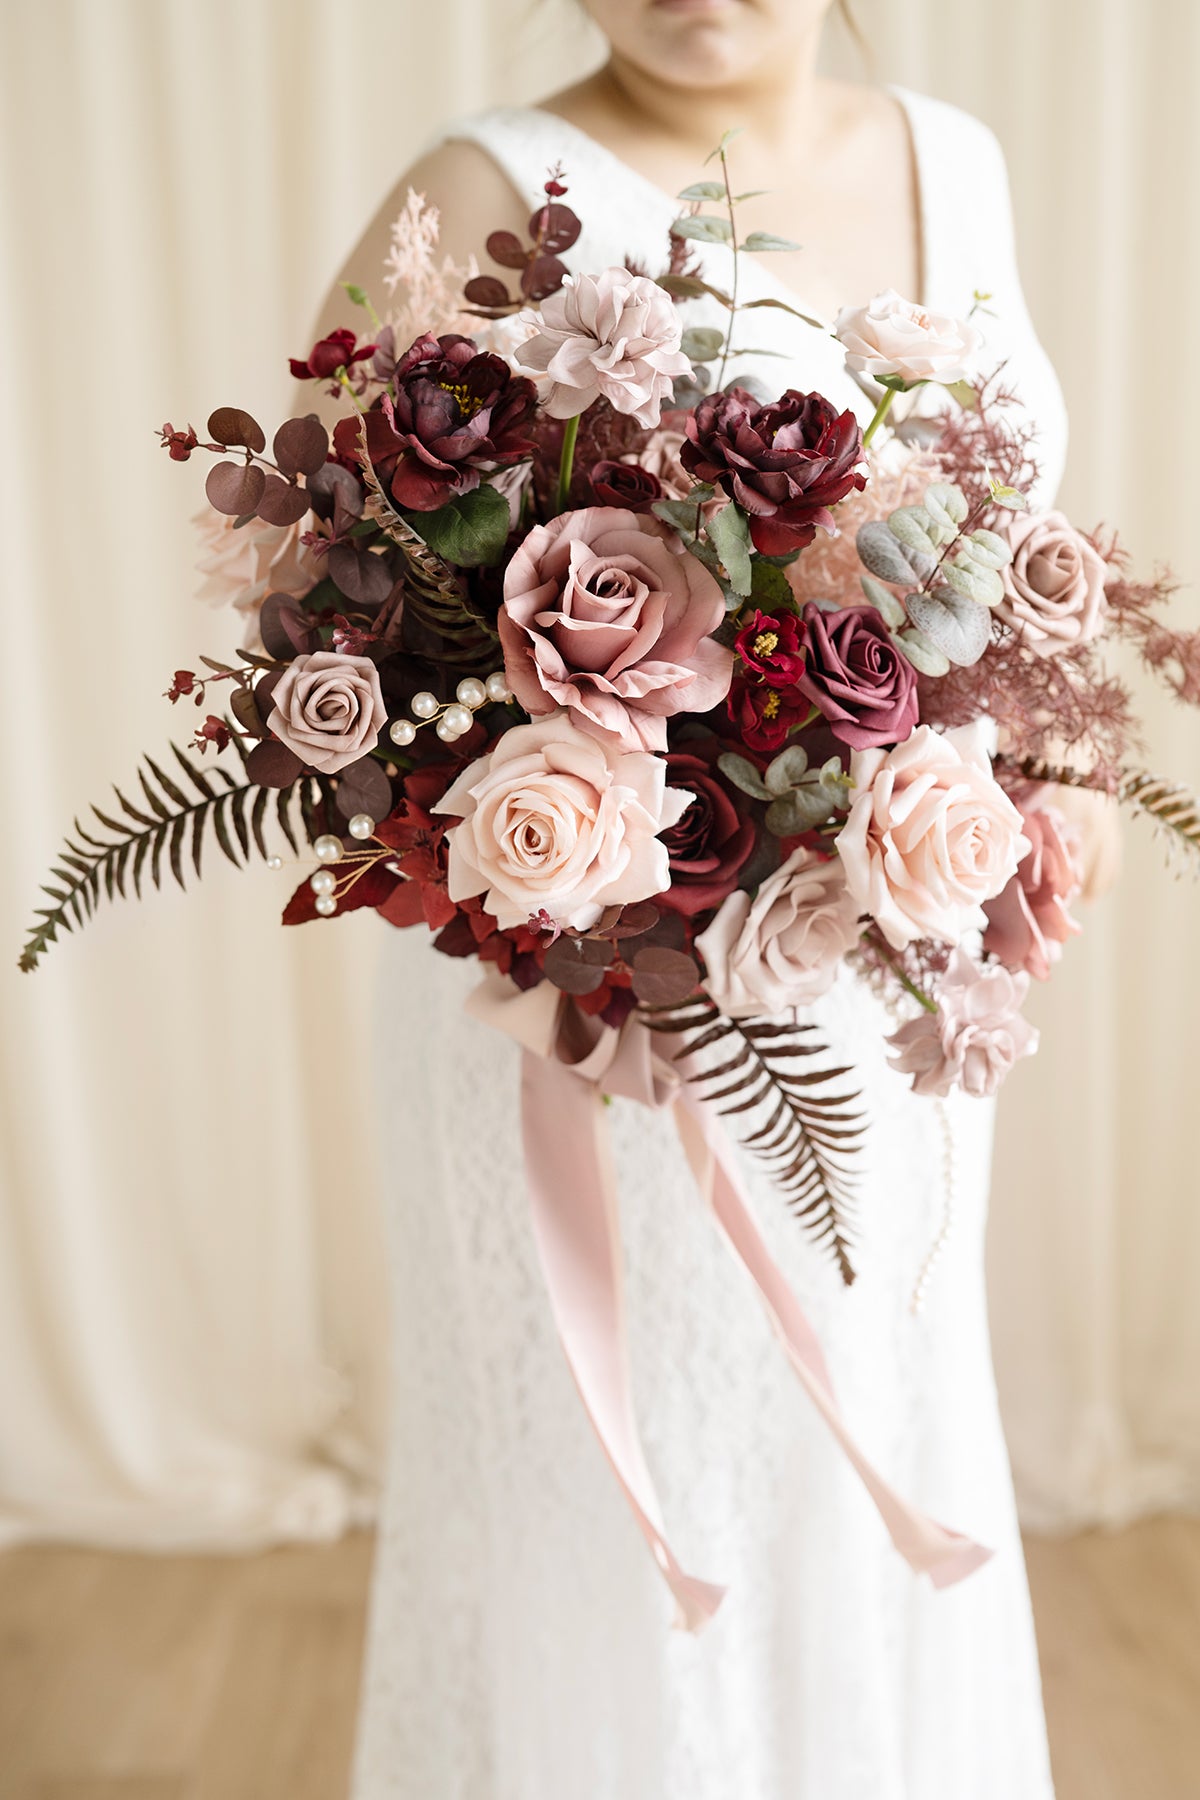 Large Free-Form Bridal Bouquet in Burgundy & Dusty Rose